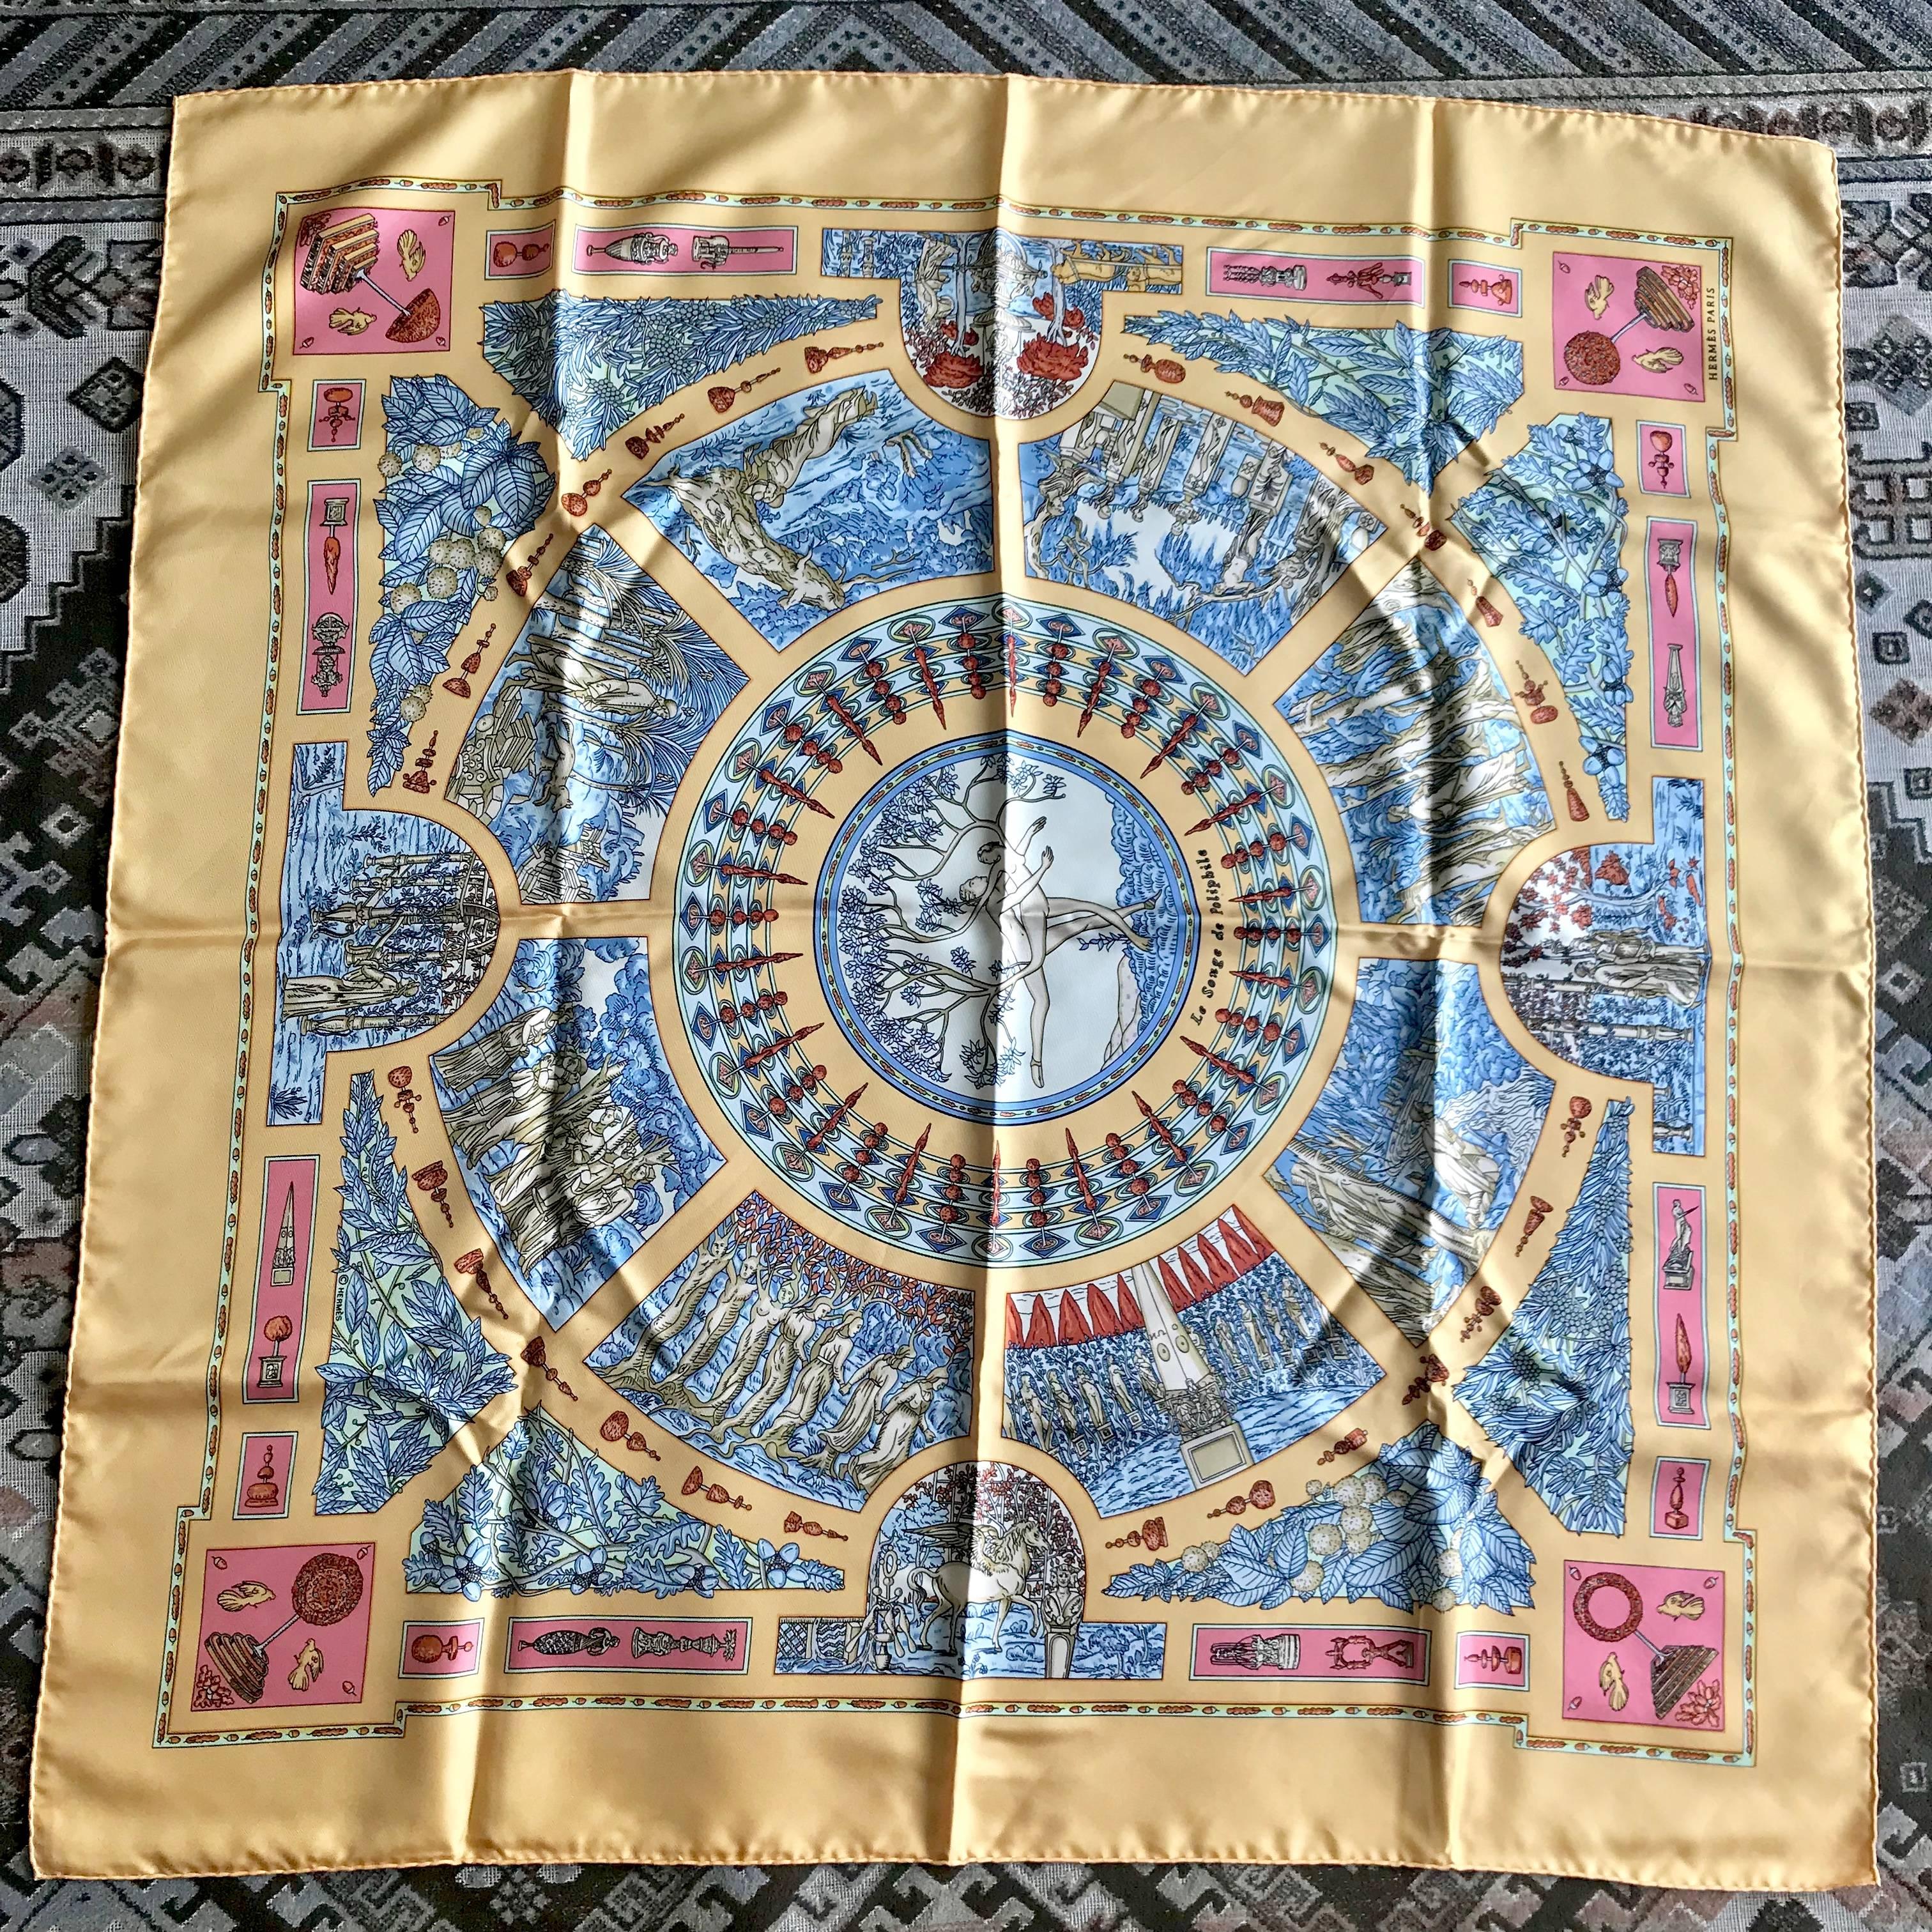 Beautiful condition! Don't miss...

1990s. Vintage HERMES Carre large silk scarf with cream yellow orange and blue tone print. Best foulard.  
Le Songe de Poliphile.  Classic foulard. Perfect gift idea. 

This is a 100% twill, large size silk Carre